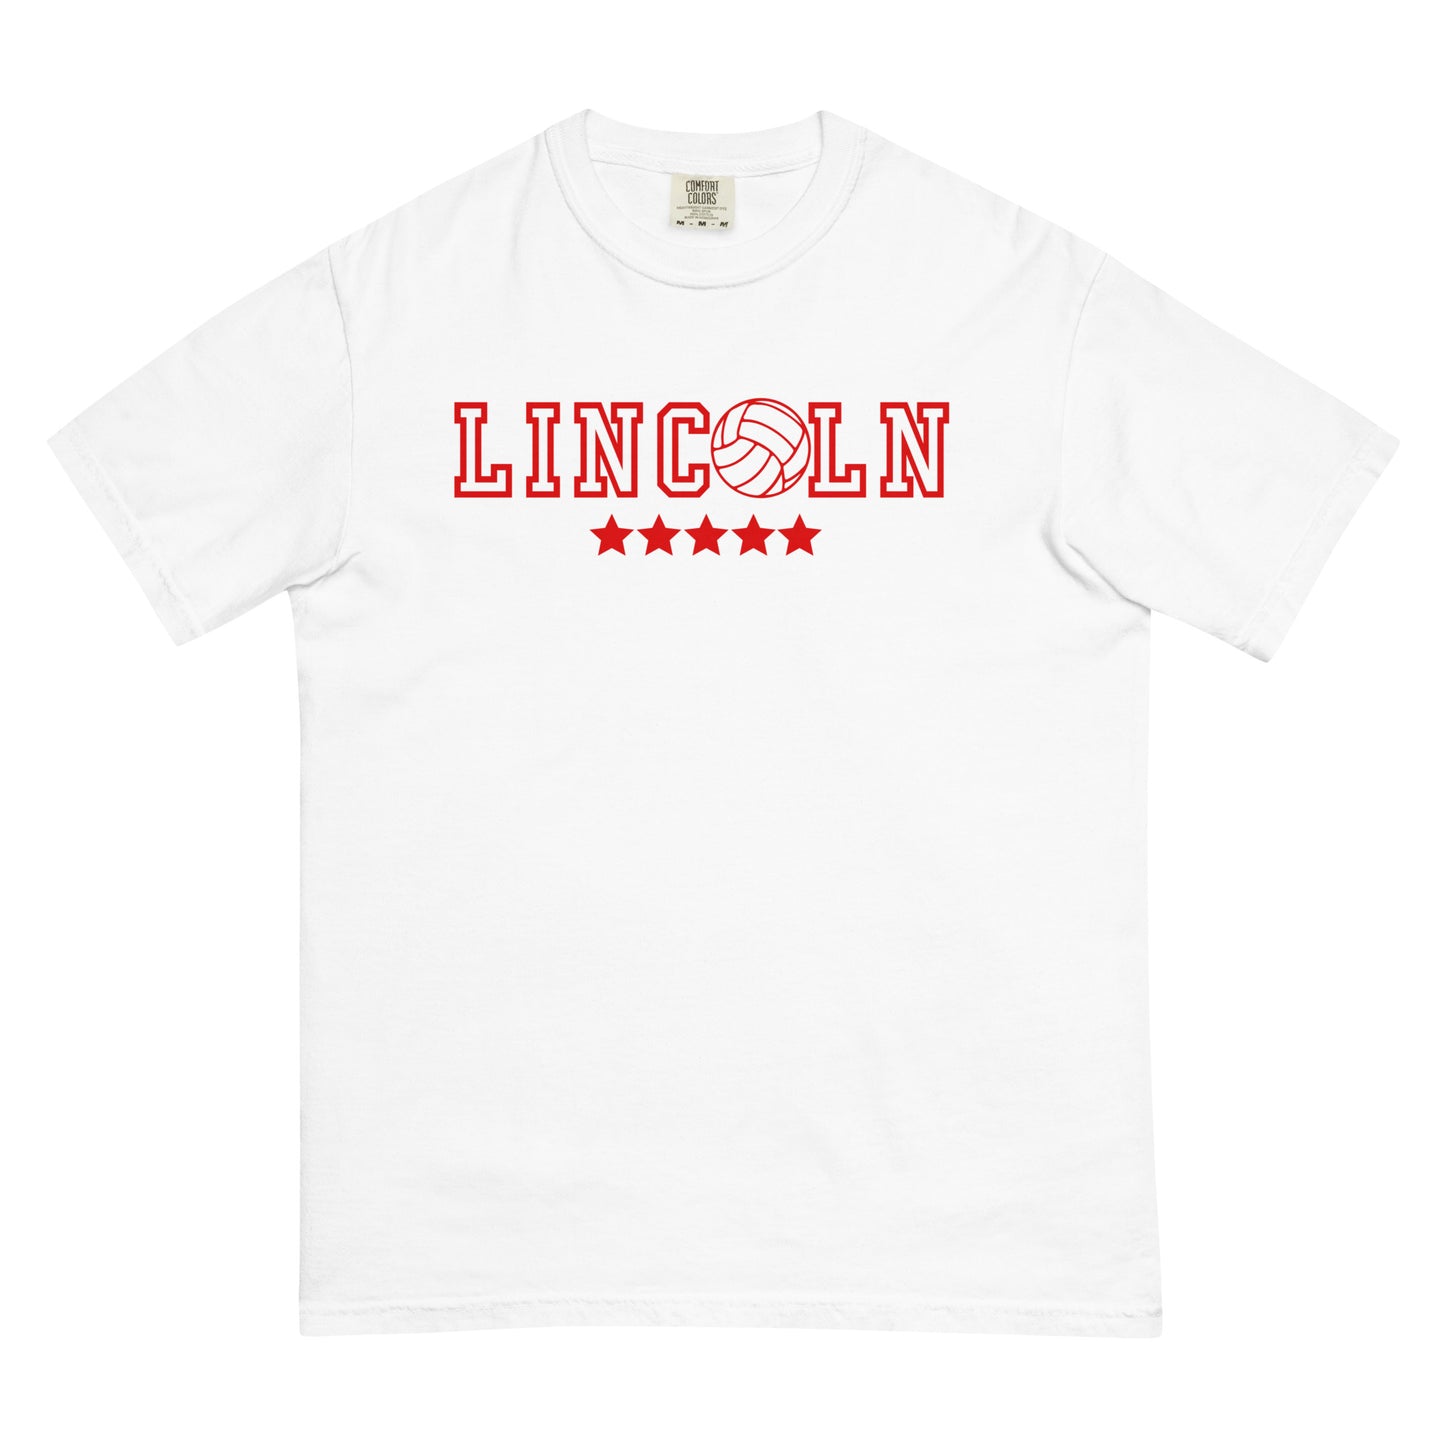 Lincoln Volleyball T-shirt